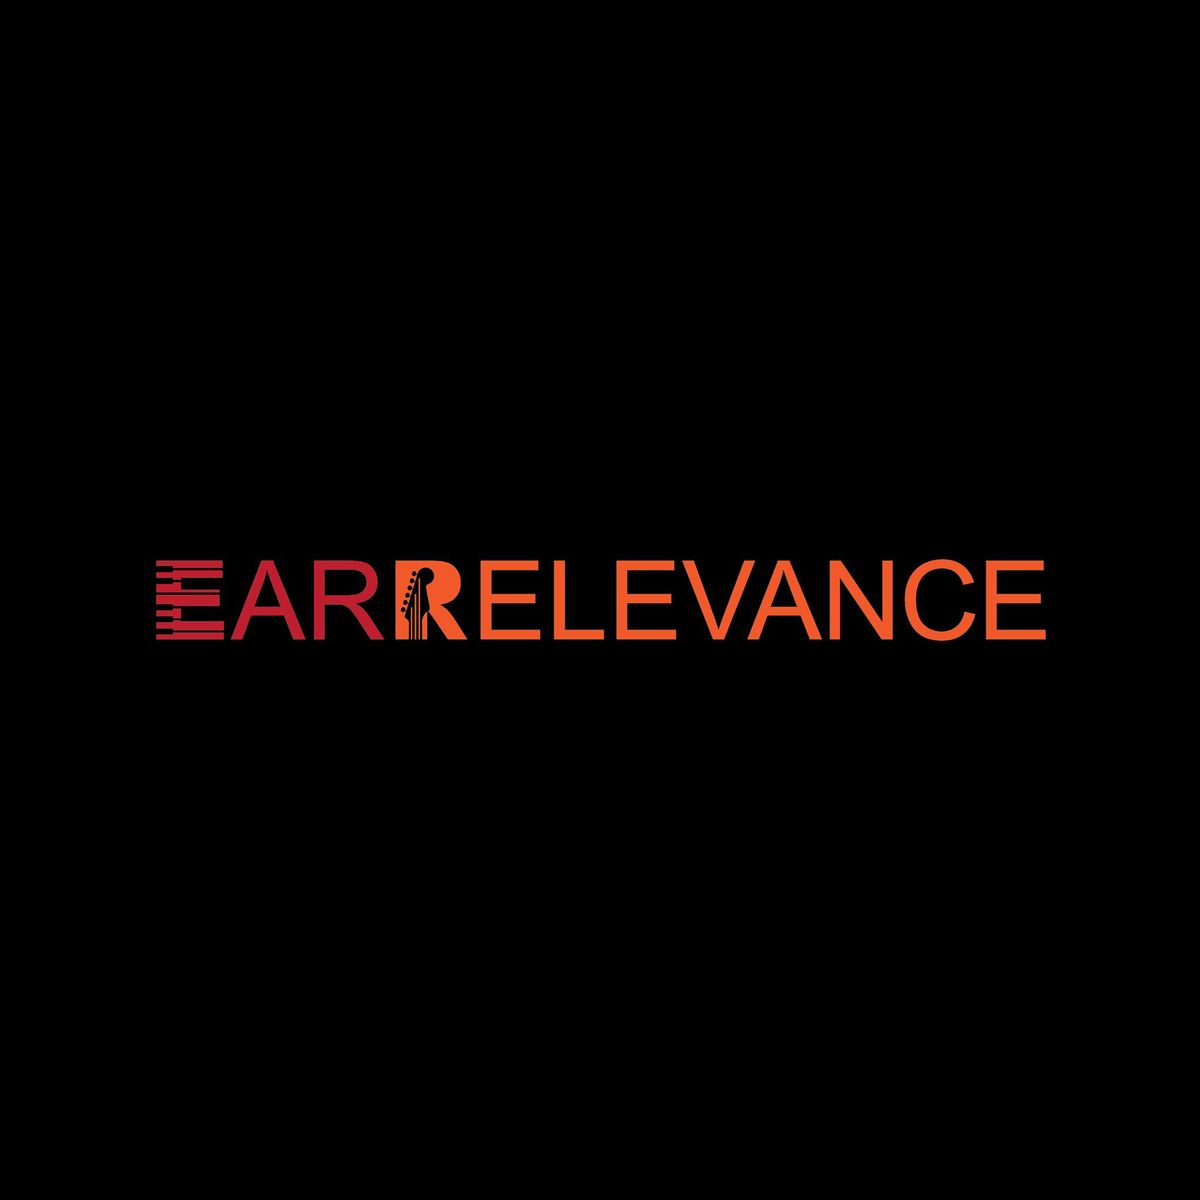 EarRelevance Live at Eight11 Place